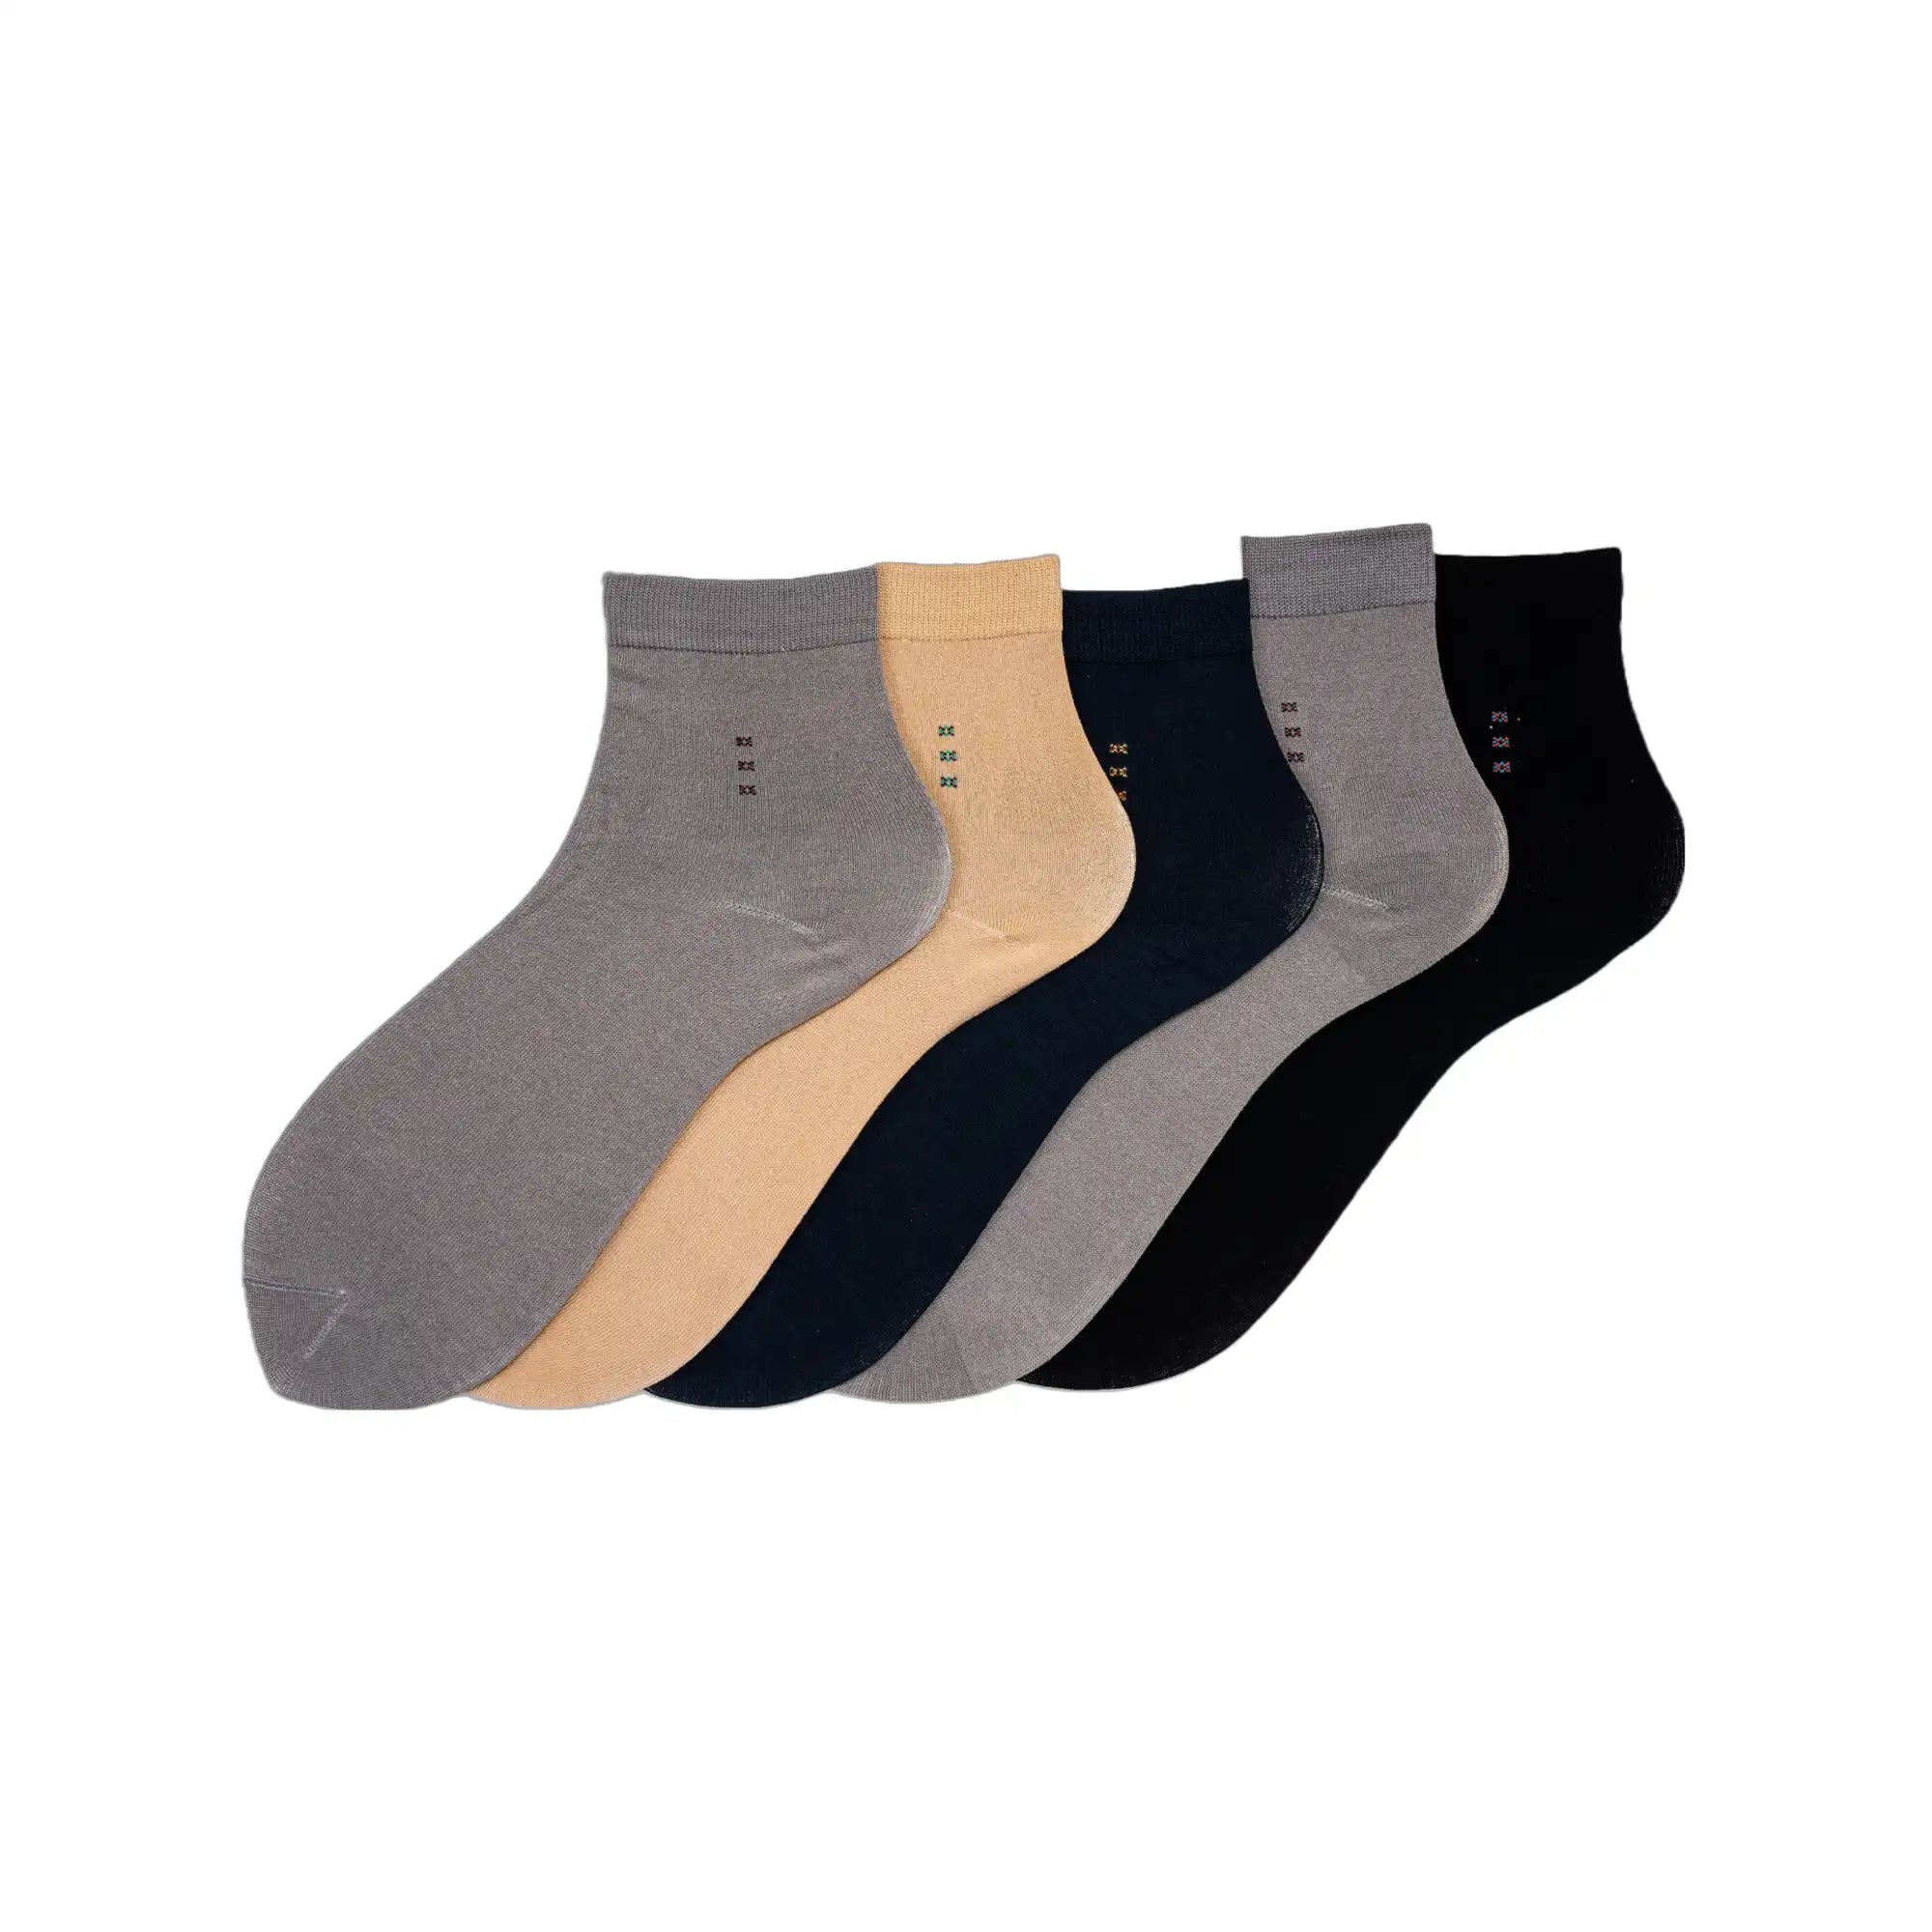 Young Wings Men's Multi Colour Cotton Fabric Solid Ankle Length Socks - Pack of 3, Style no. M1-2134 N